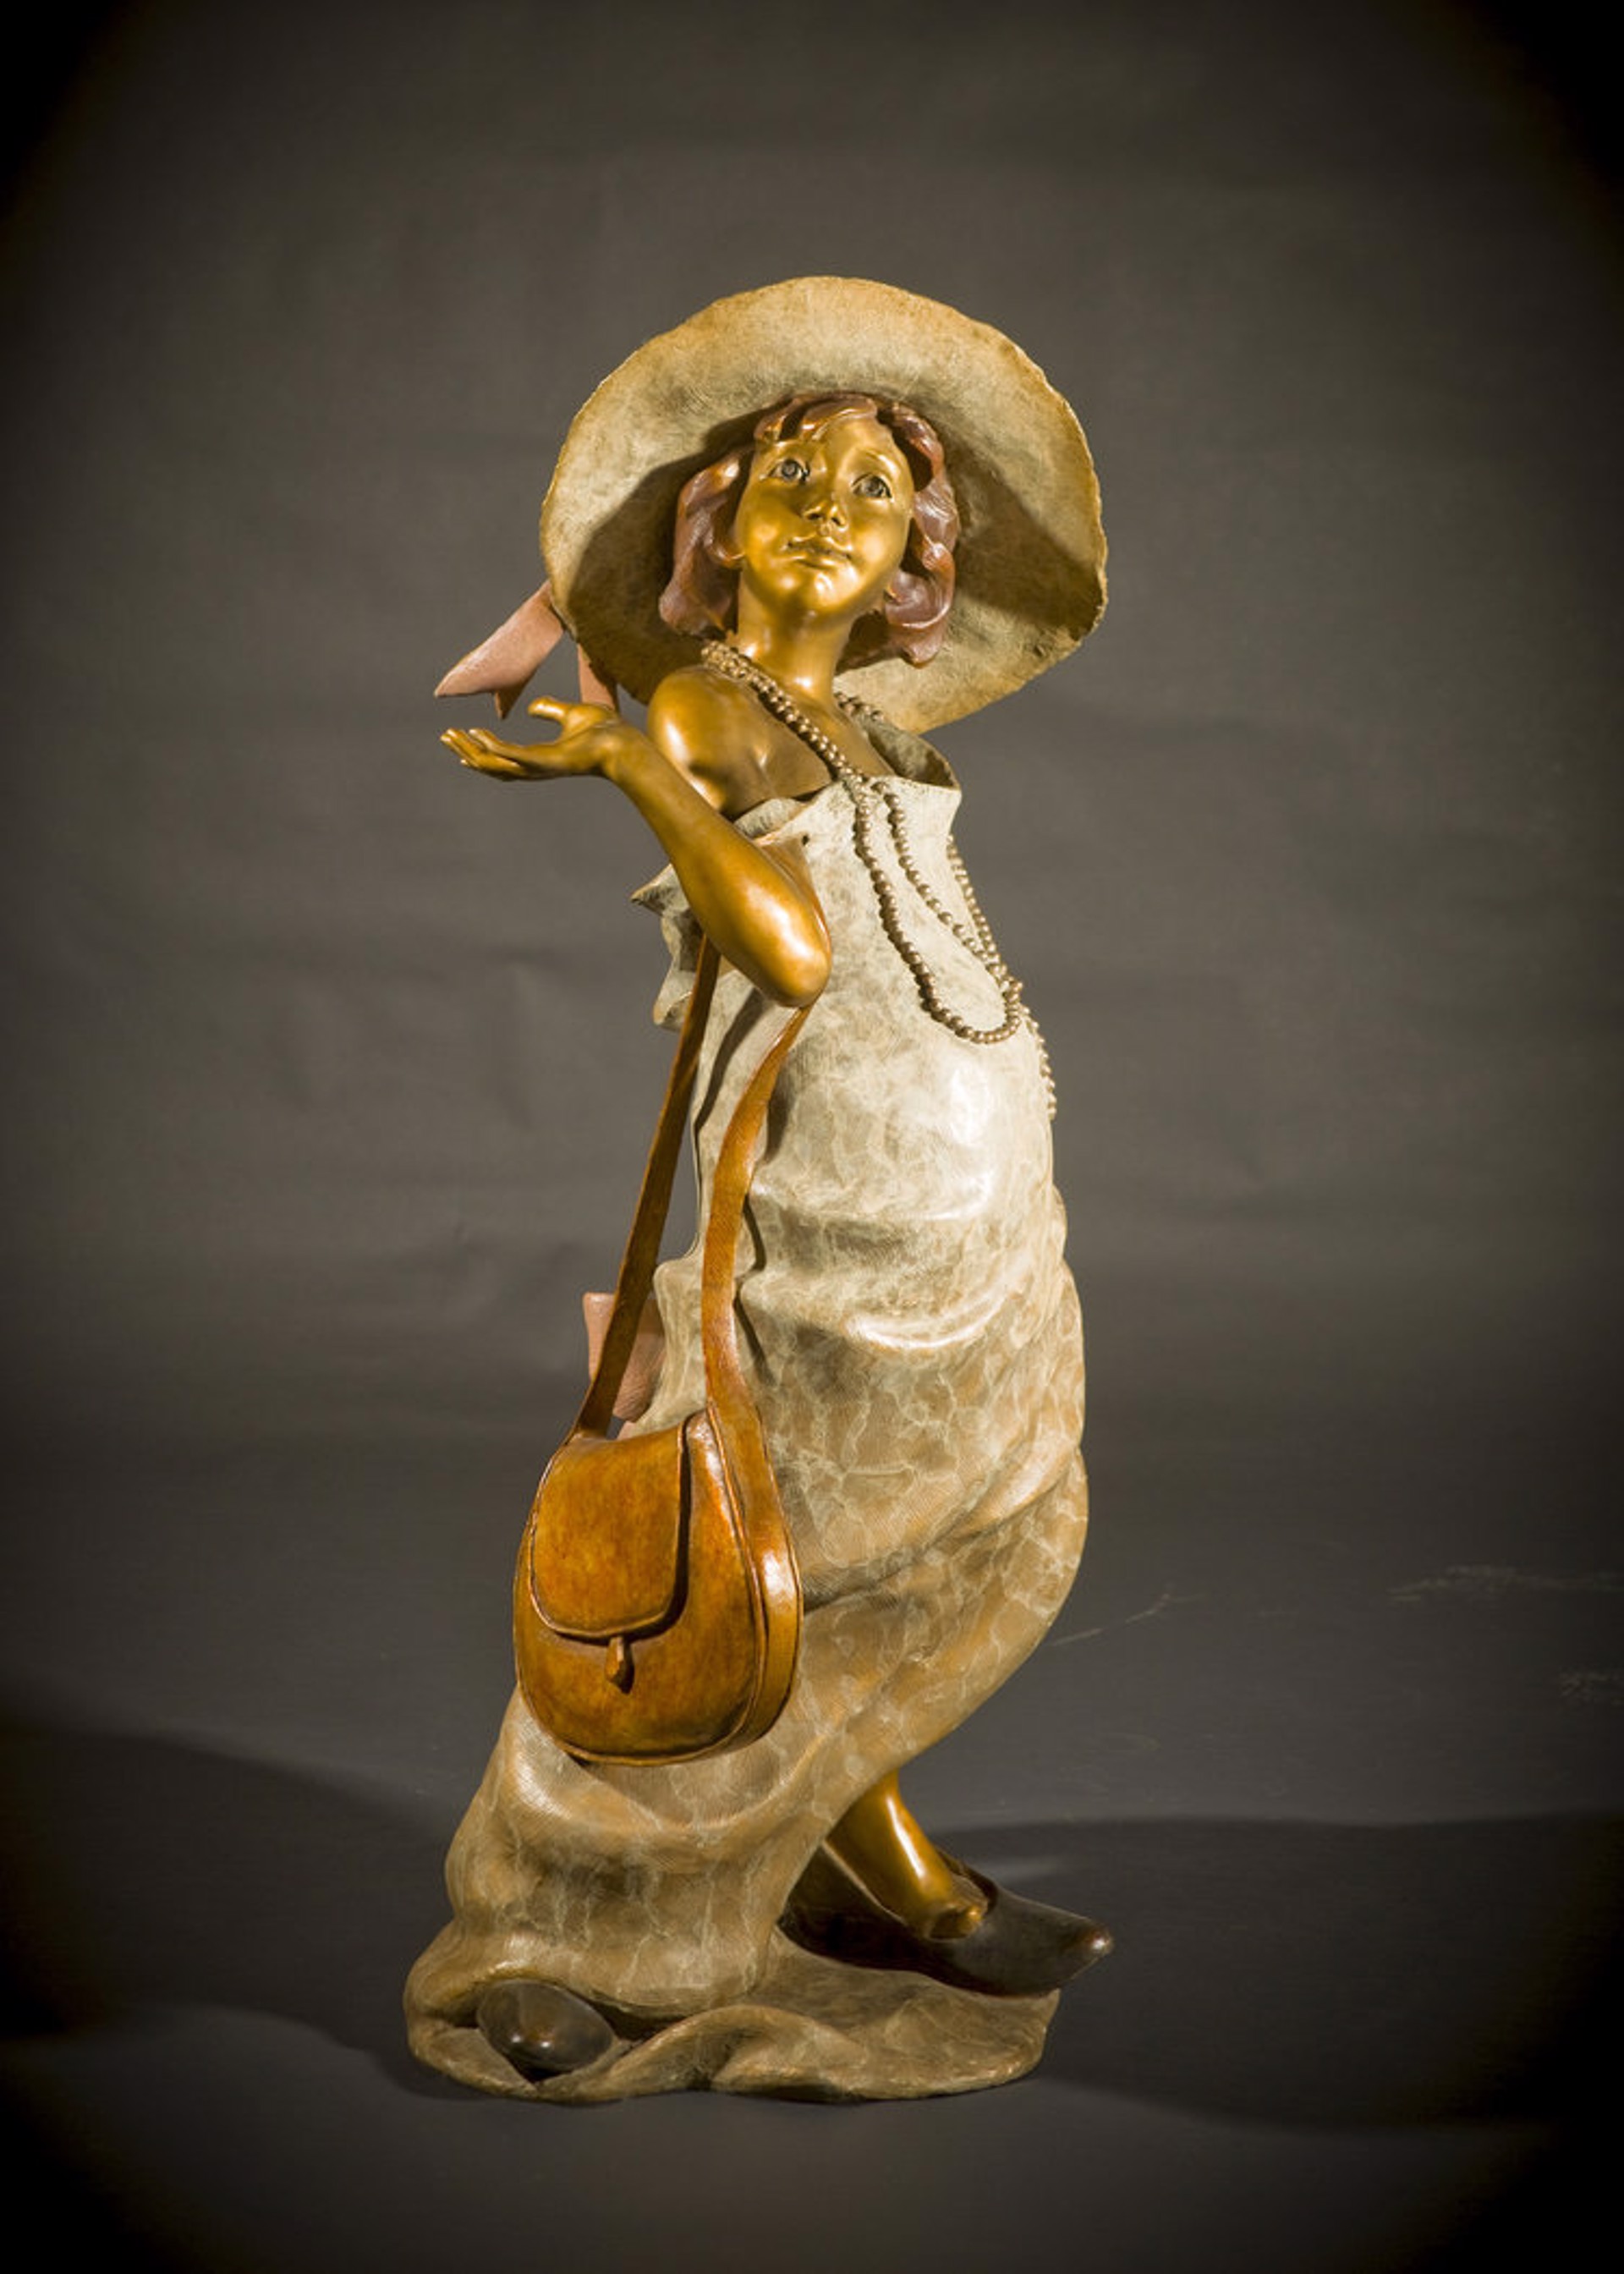 Lil' Lady (Maquette) (Edition of 150) by Walt Horton